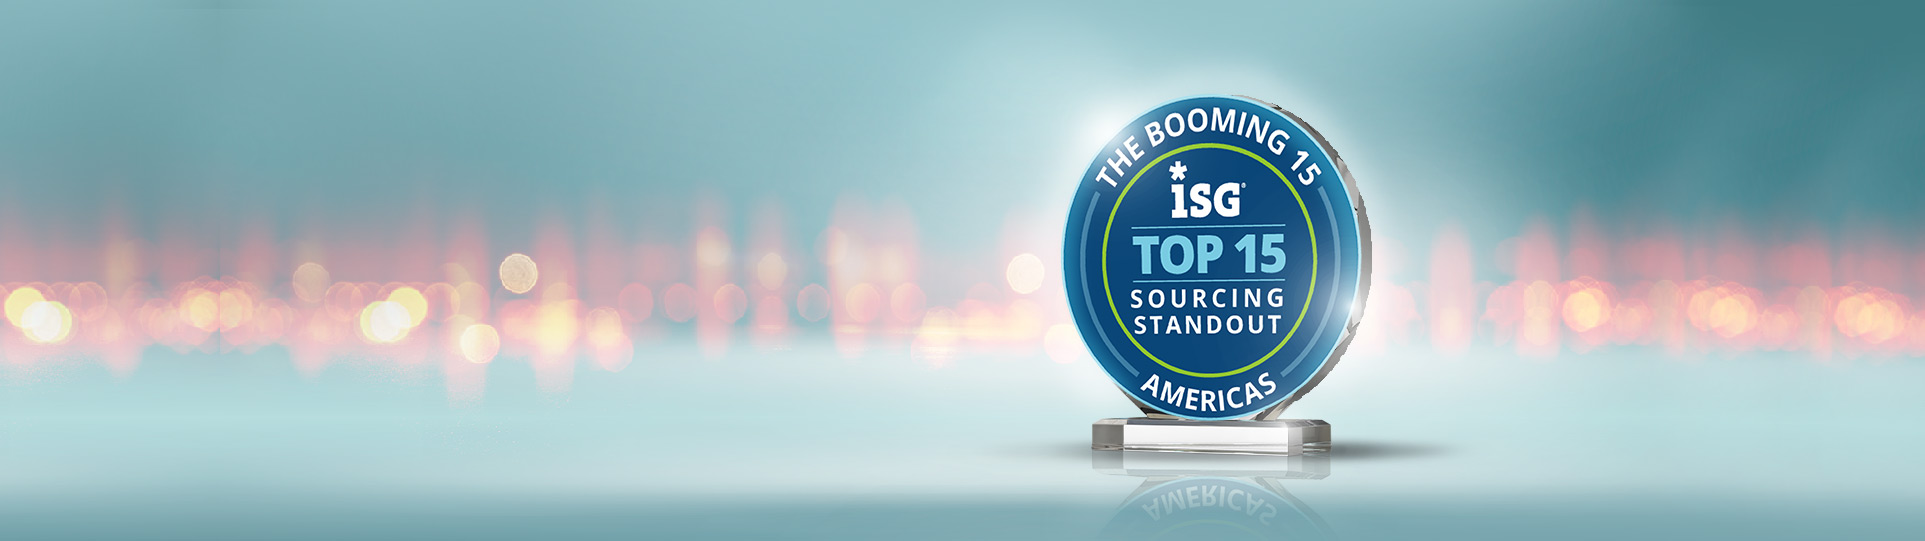 Birlasoft Named a Top 15 Sourcing Standout by ISG